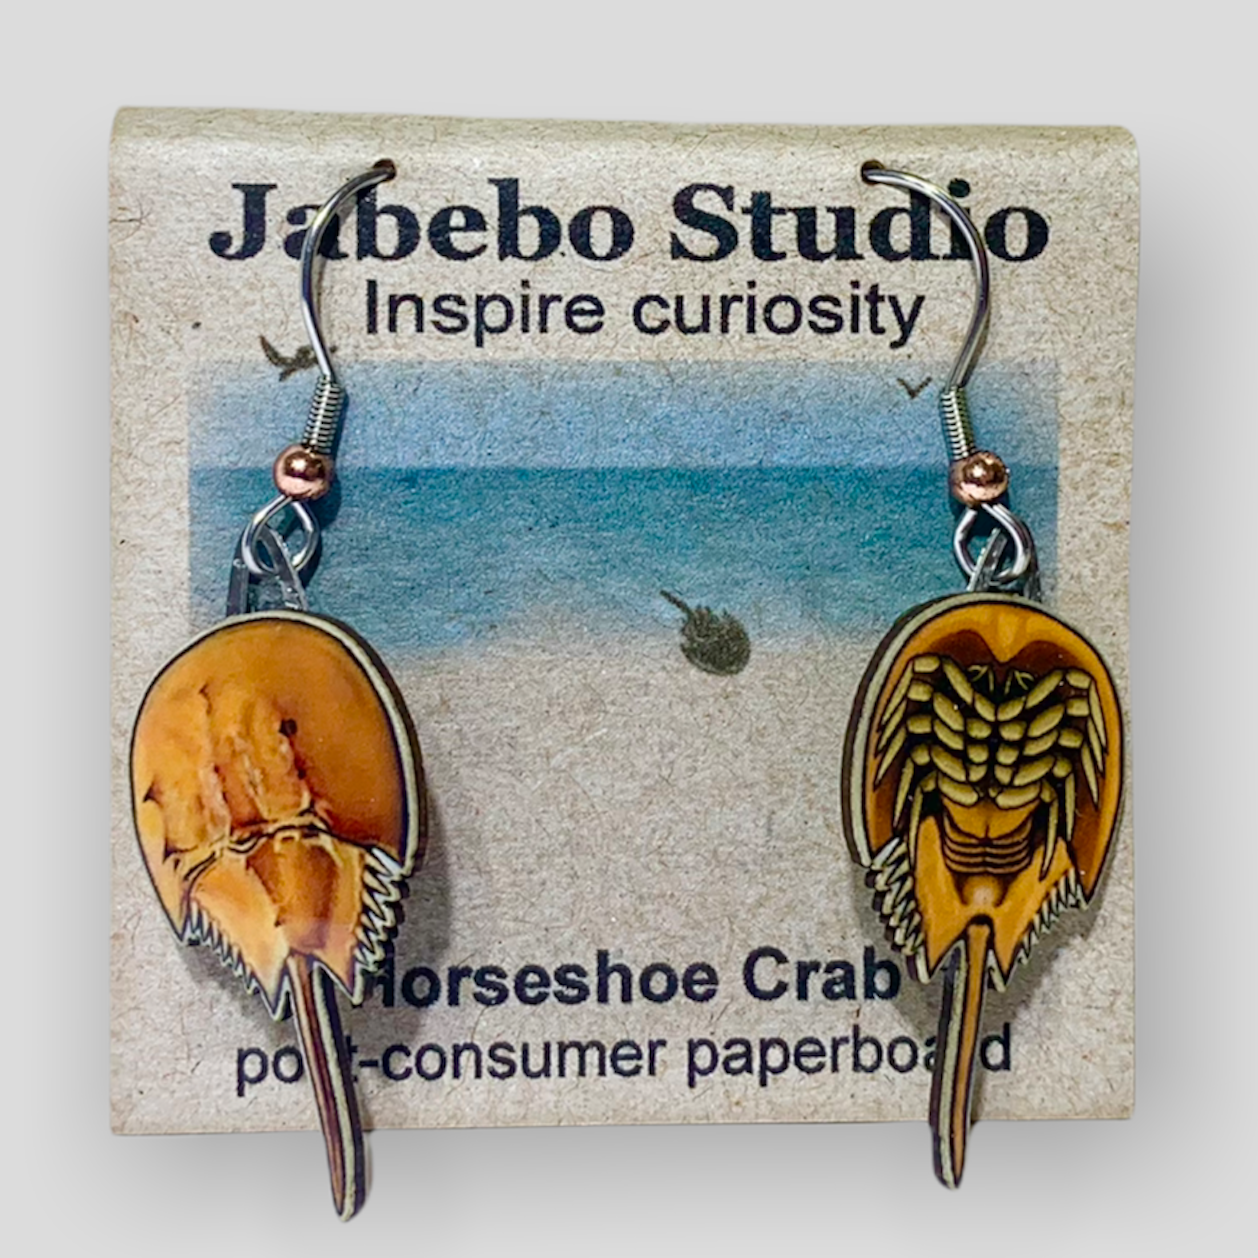 Picture shown is of 1 inch tall pair of earrings of the marine animal the Horseshoe Crab.